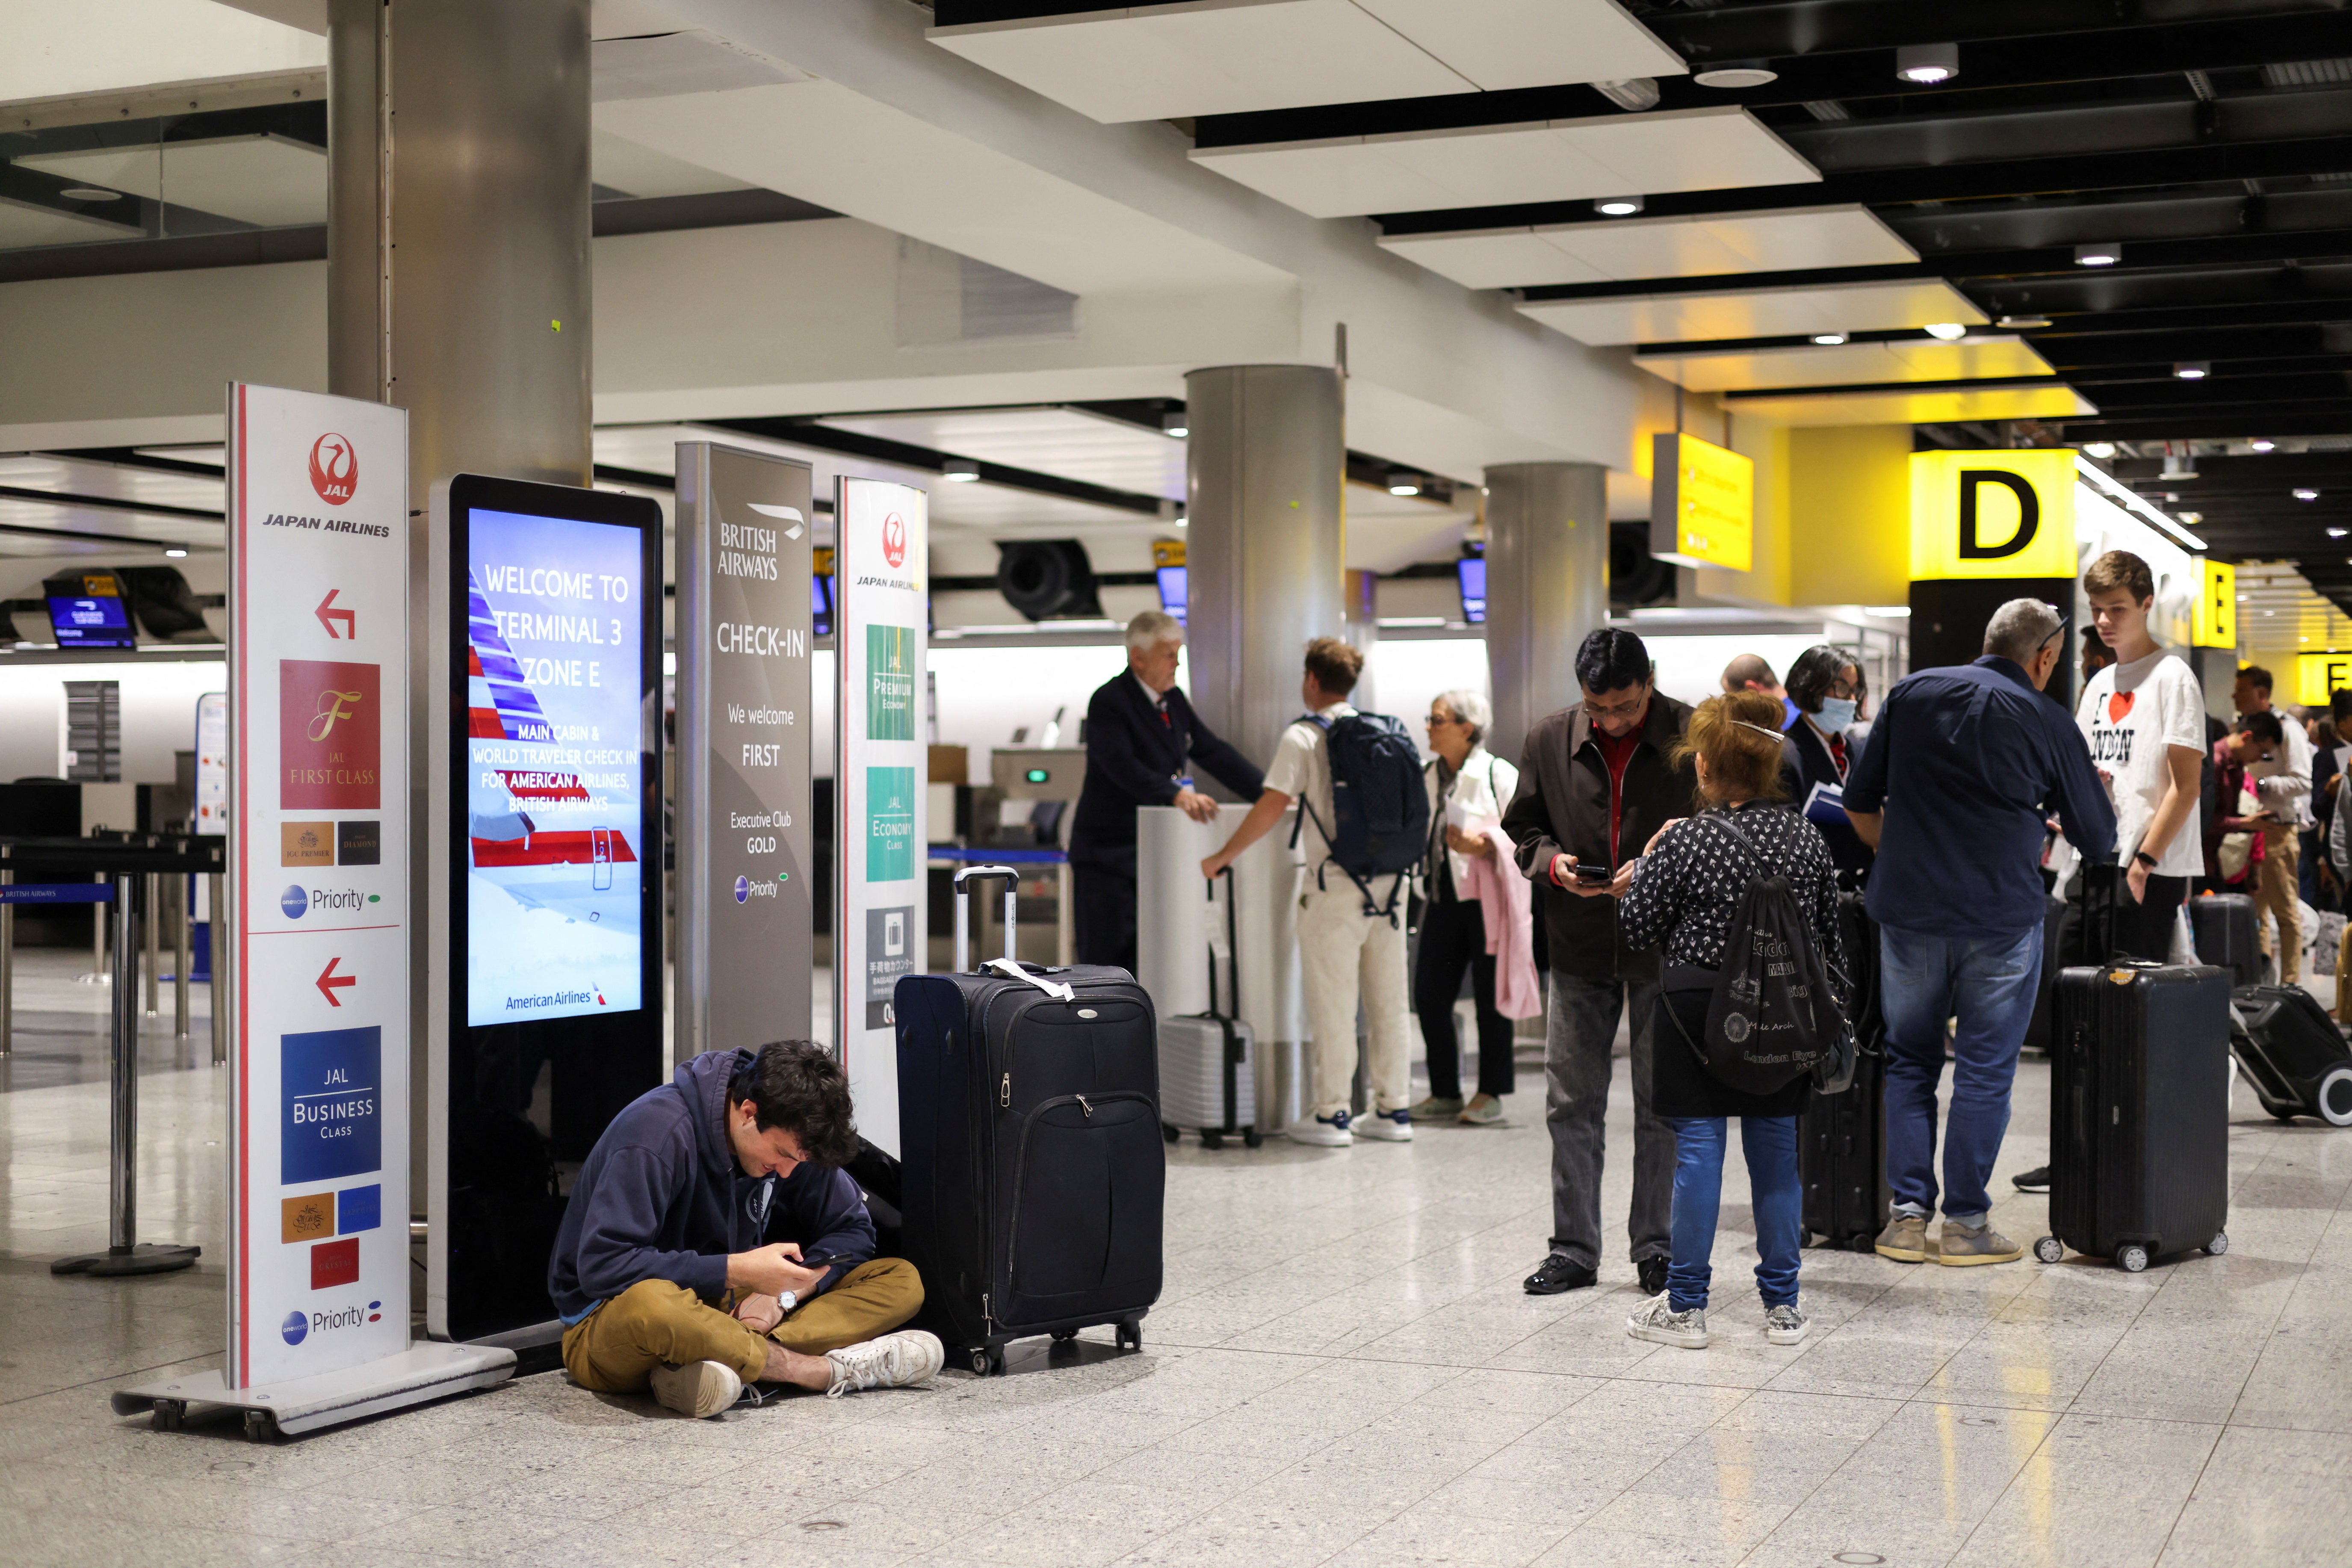 Heathrow Terminal 3: a perfect place to feel the spirit of mobility – and talk to fellow passengers